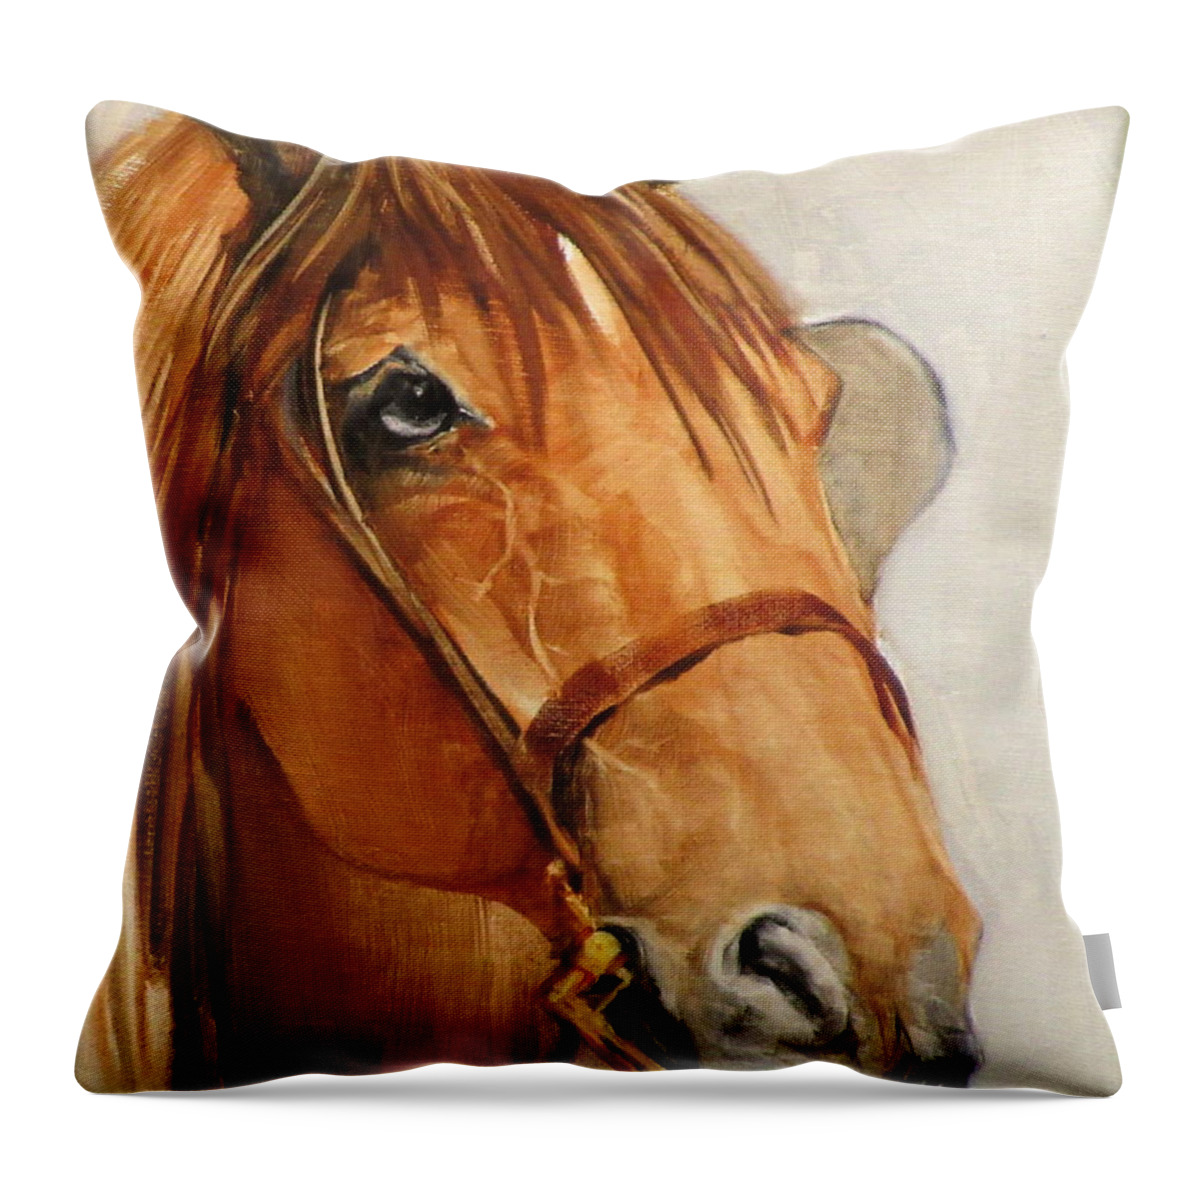 Horse Throw Pillow featuring the painting Roman by Gregg Caudell